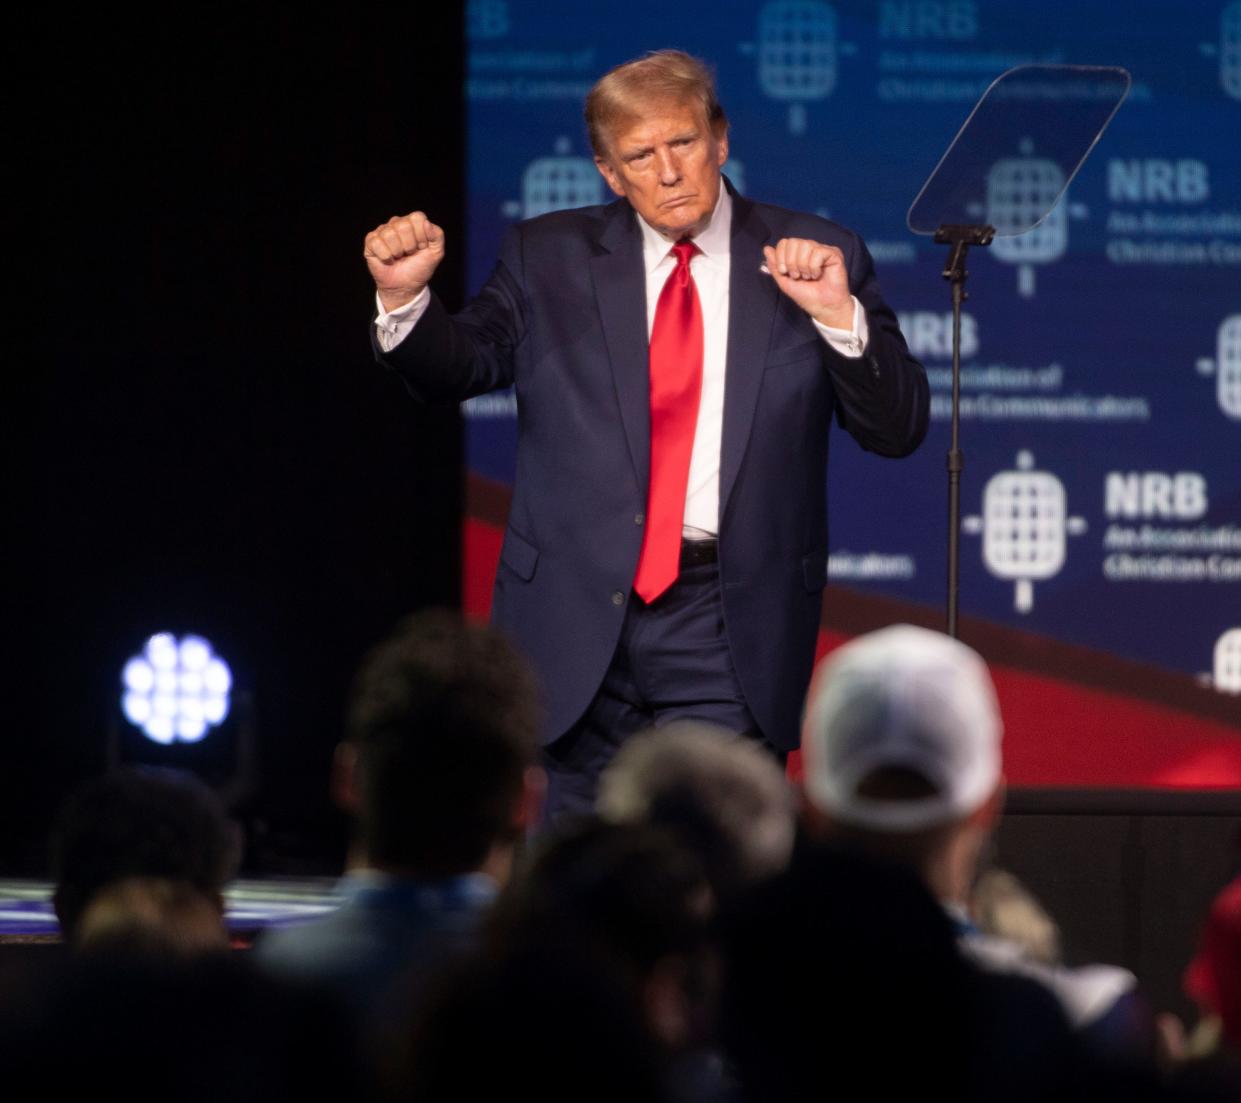 Former President Donald Trump addresses the 2024 NRB International Christian Media Convention sponsored by the National Religious Broadcasters association in Nashville, Tenn., last week.